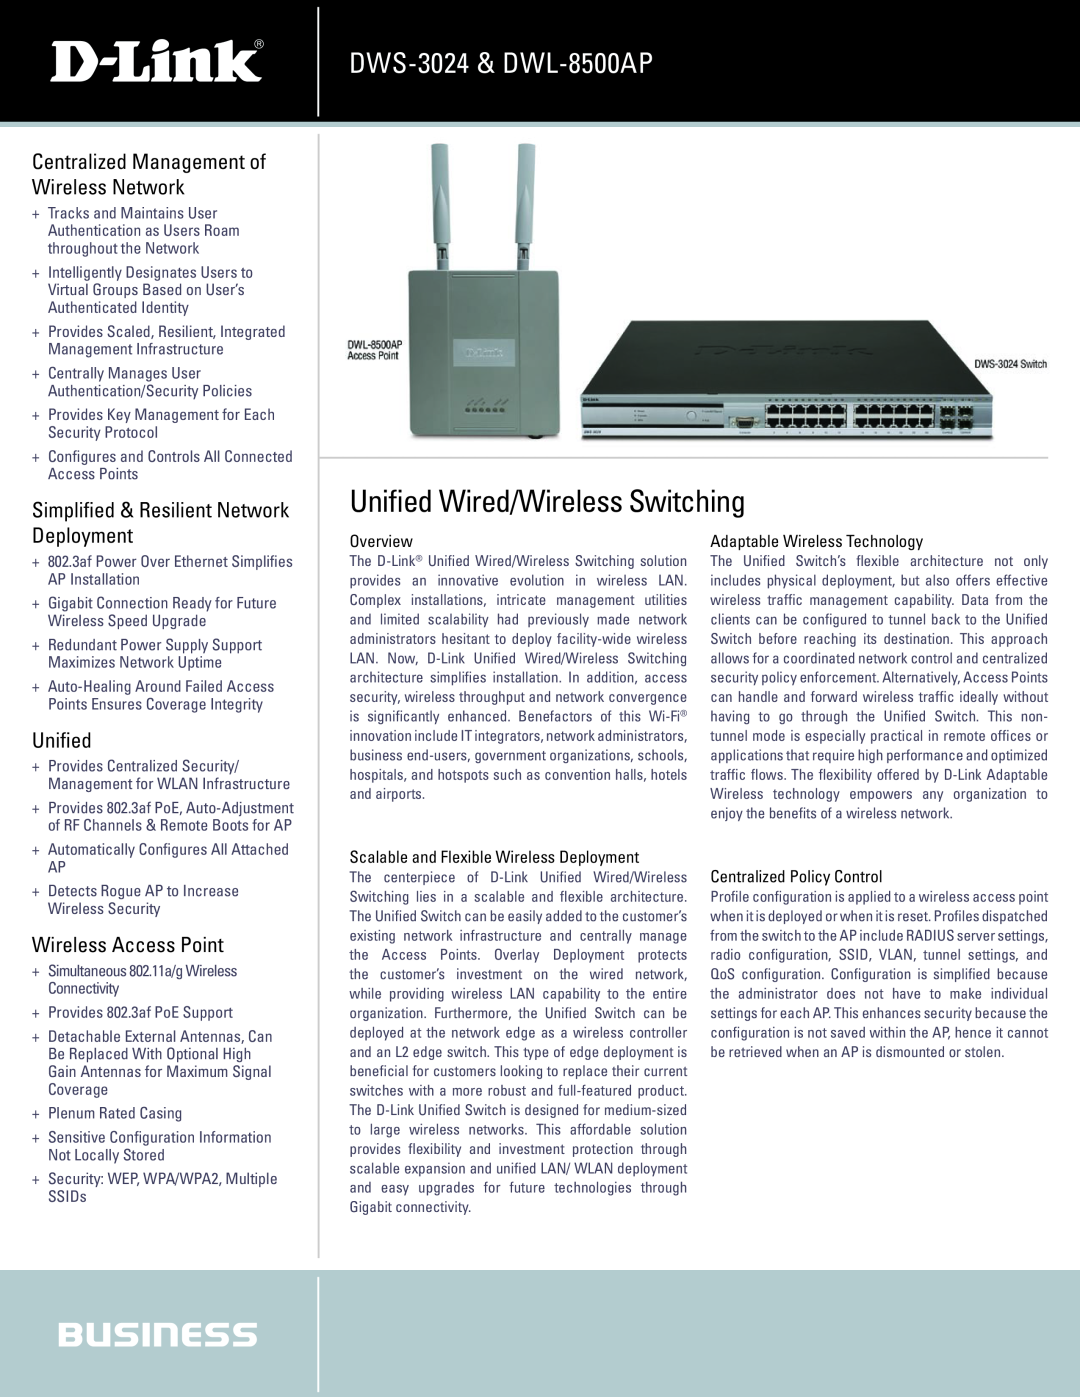 D-Link manual Unified Wired/Wireless Switching, DWS-3024 & DWL-8500AP, Centralized Management of Wireless Network 